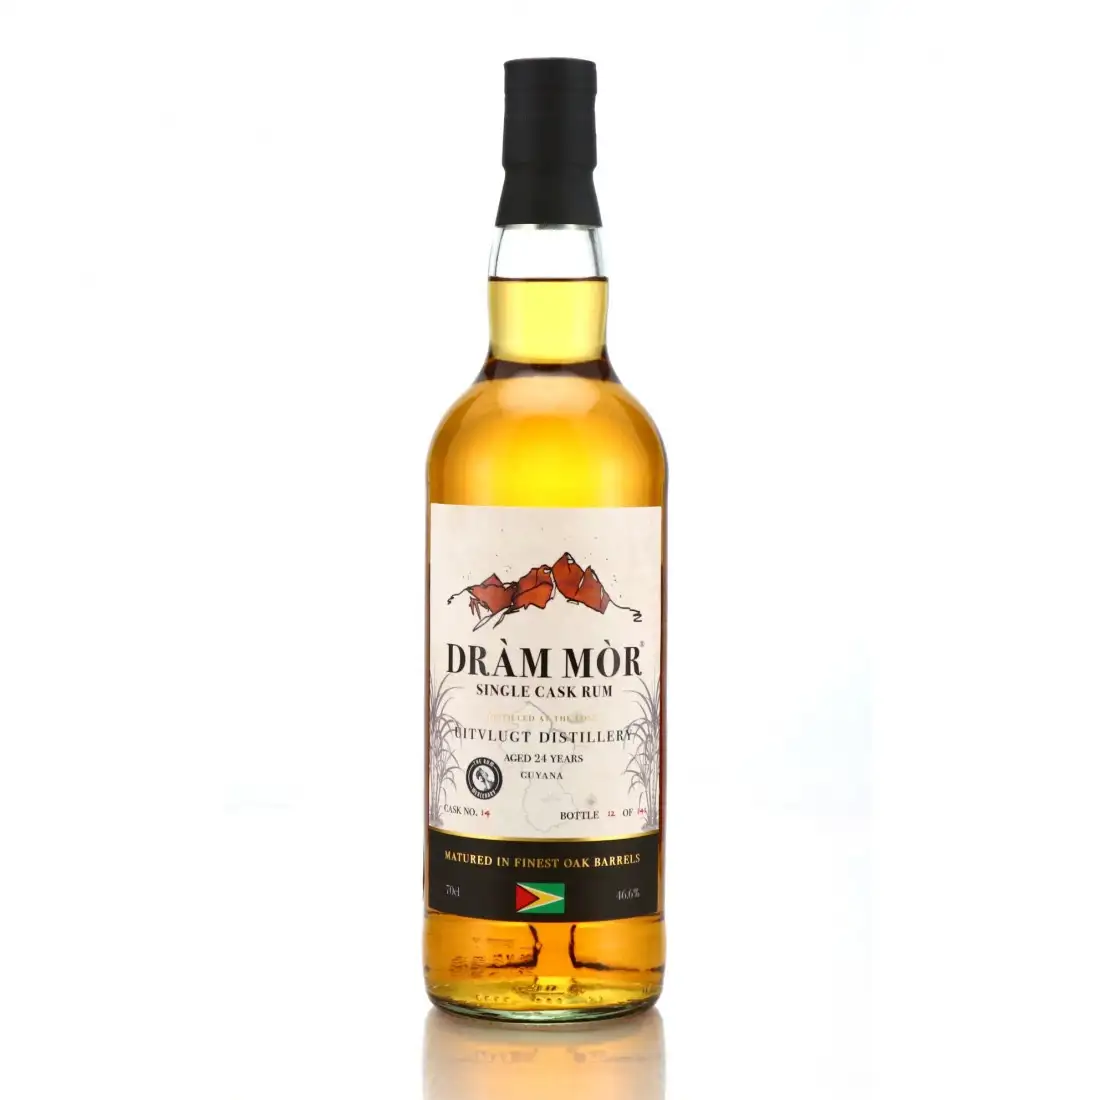 Image of the front of the bottle of the rum Single Cask Rum MPMM